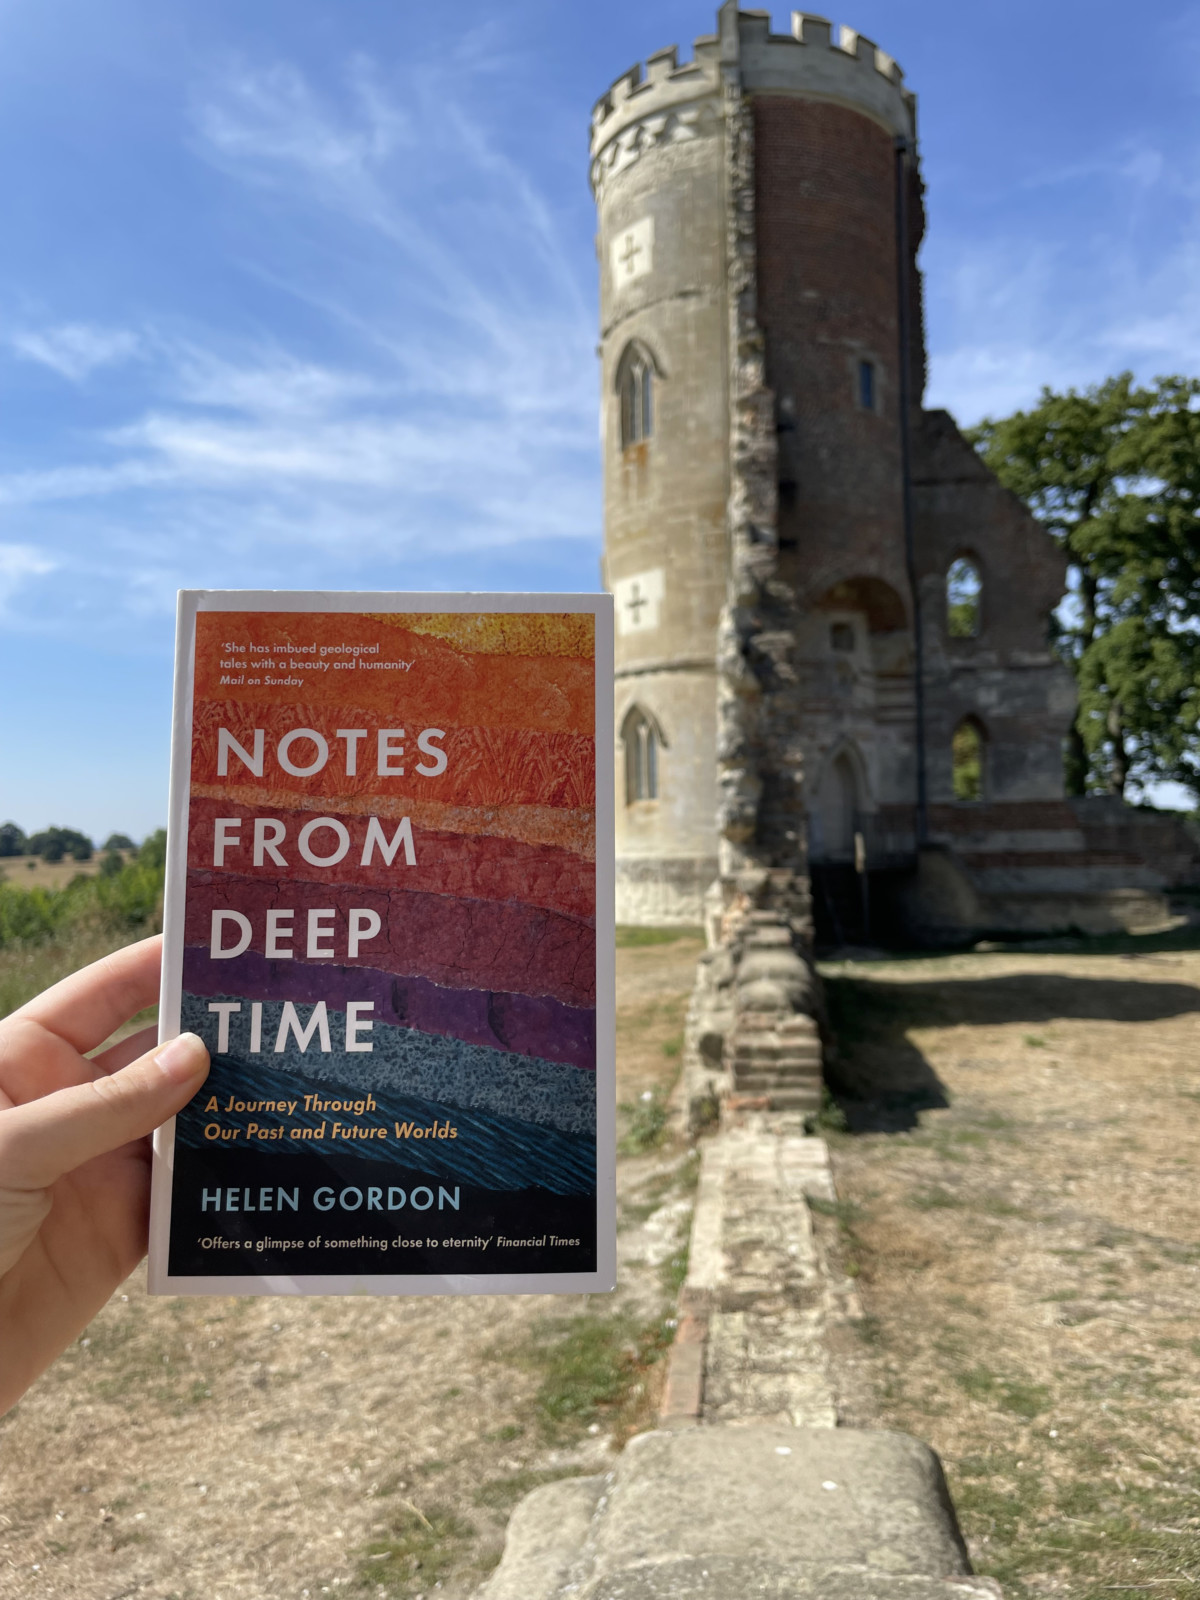 The cover of the book 'Notes From Deep Time' by Helen Gordon, with the folly where I read the book in the background.